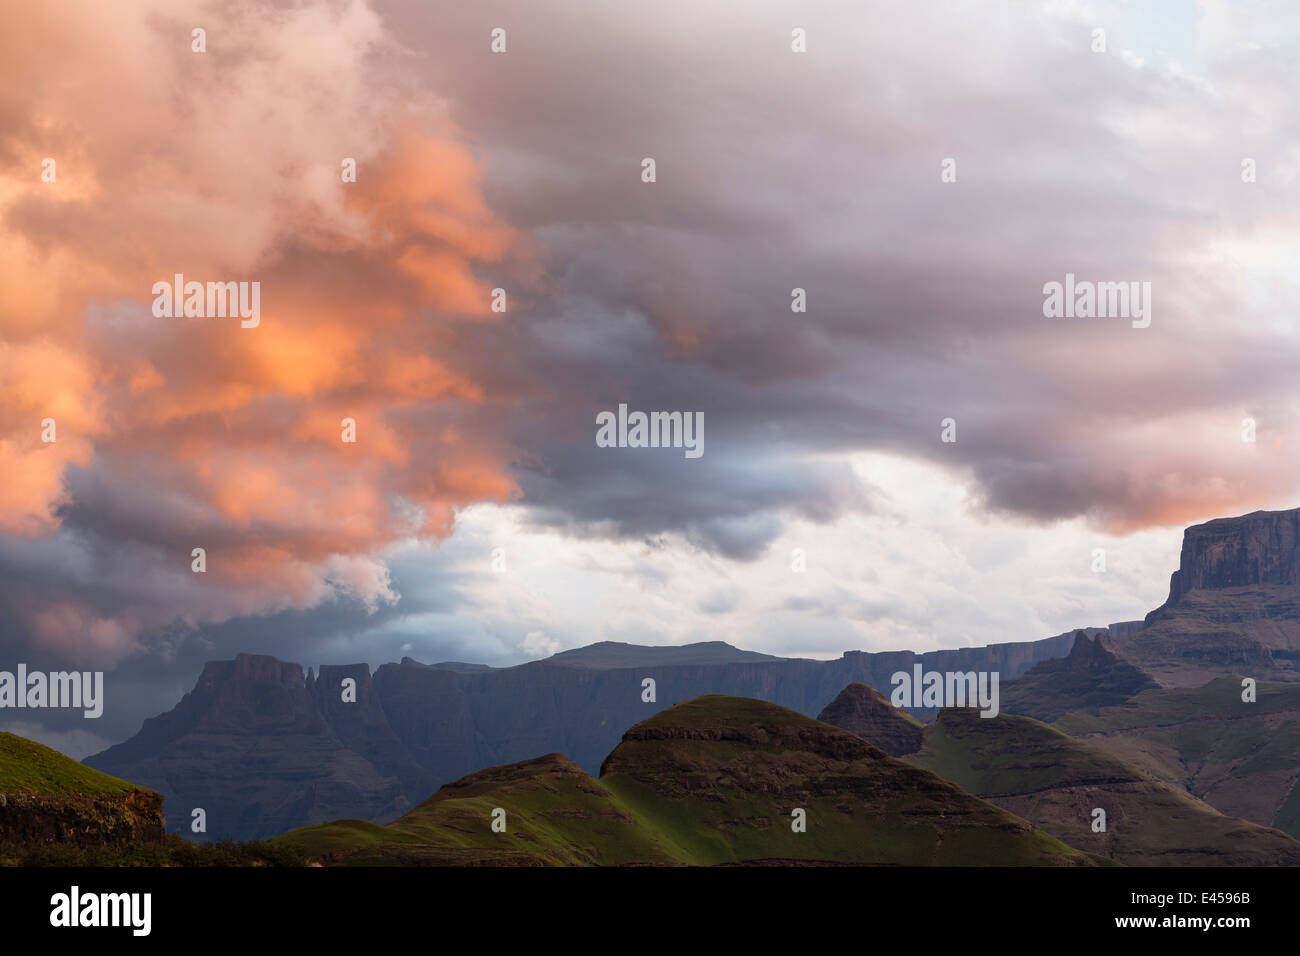 Storm clouds over the Drakensberg Amphitheatre situated within the Royal Natal National Park, South Africa Stock Photo